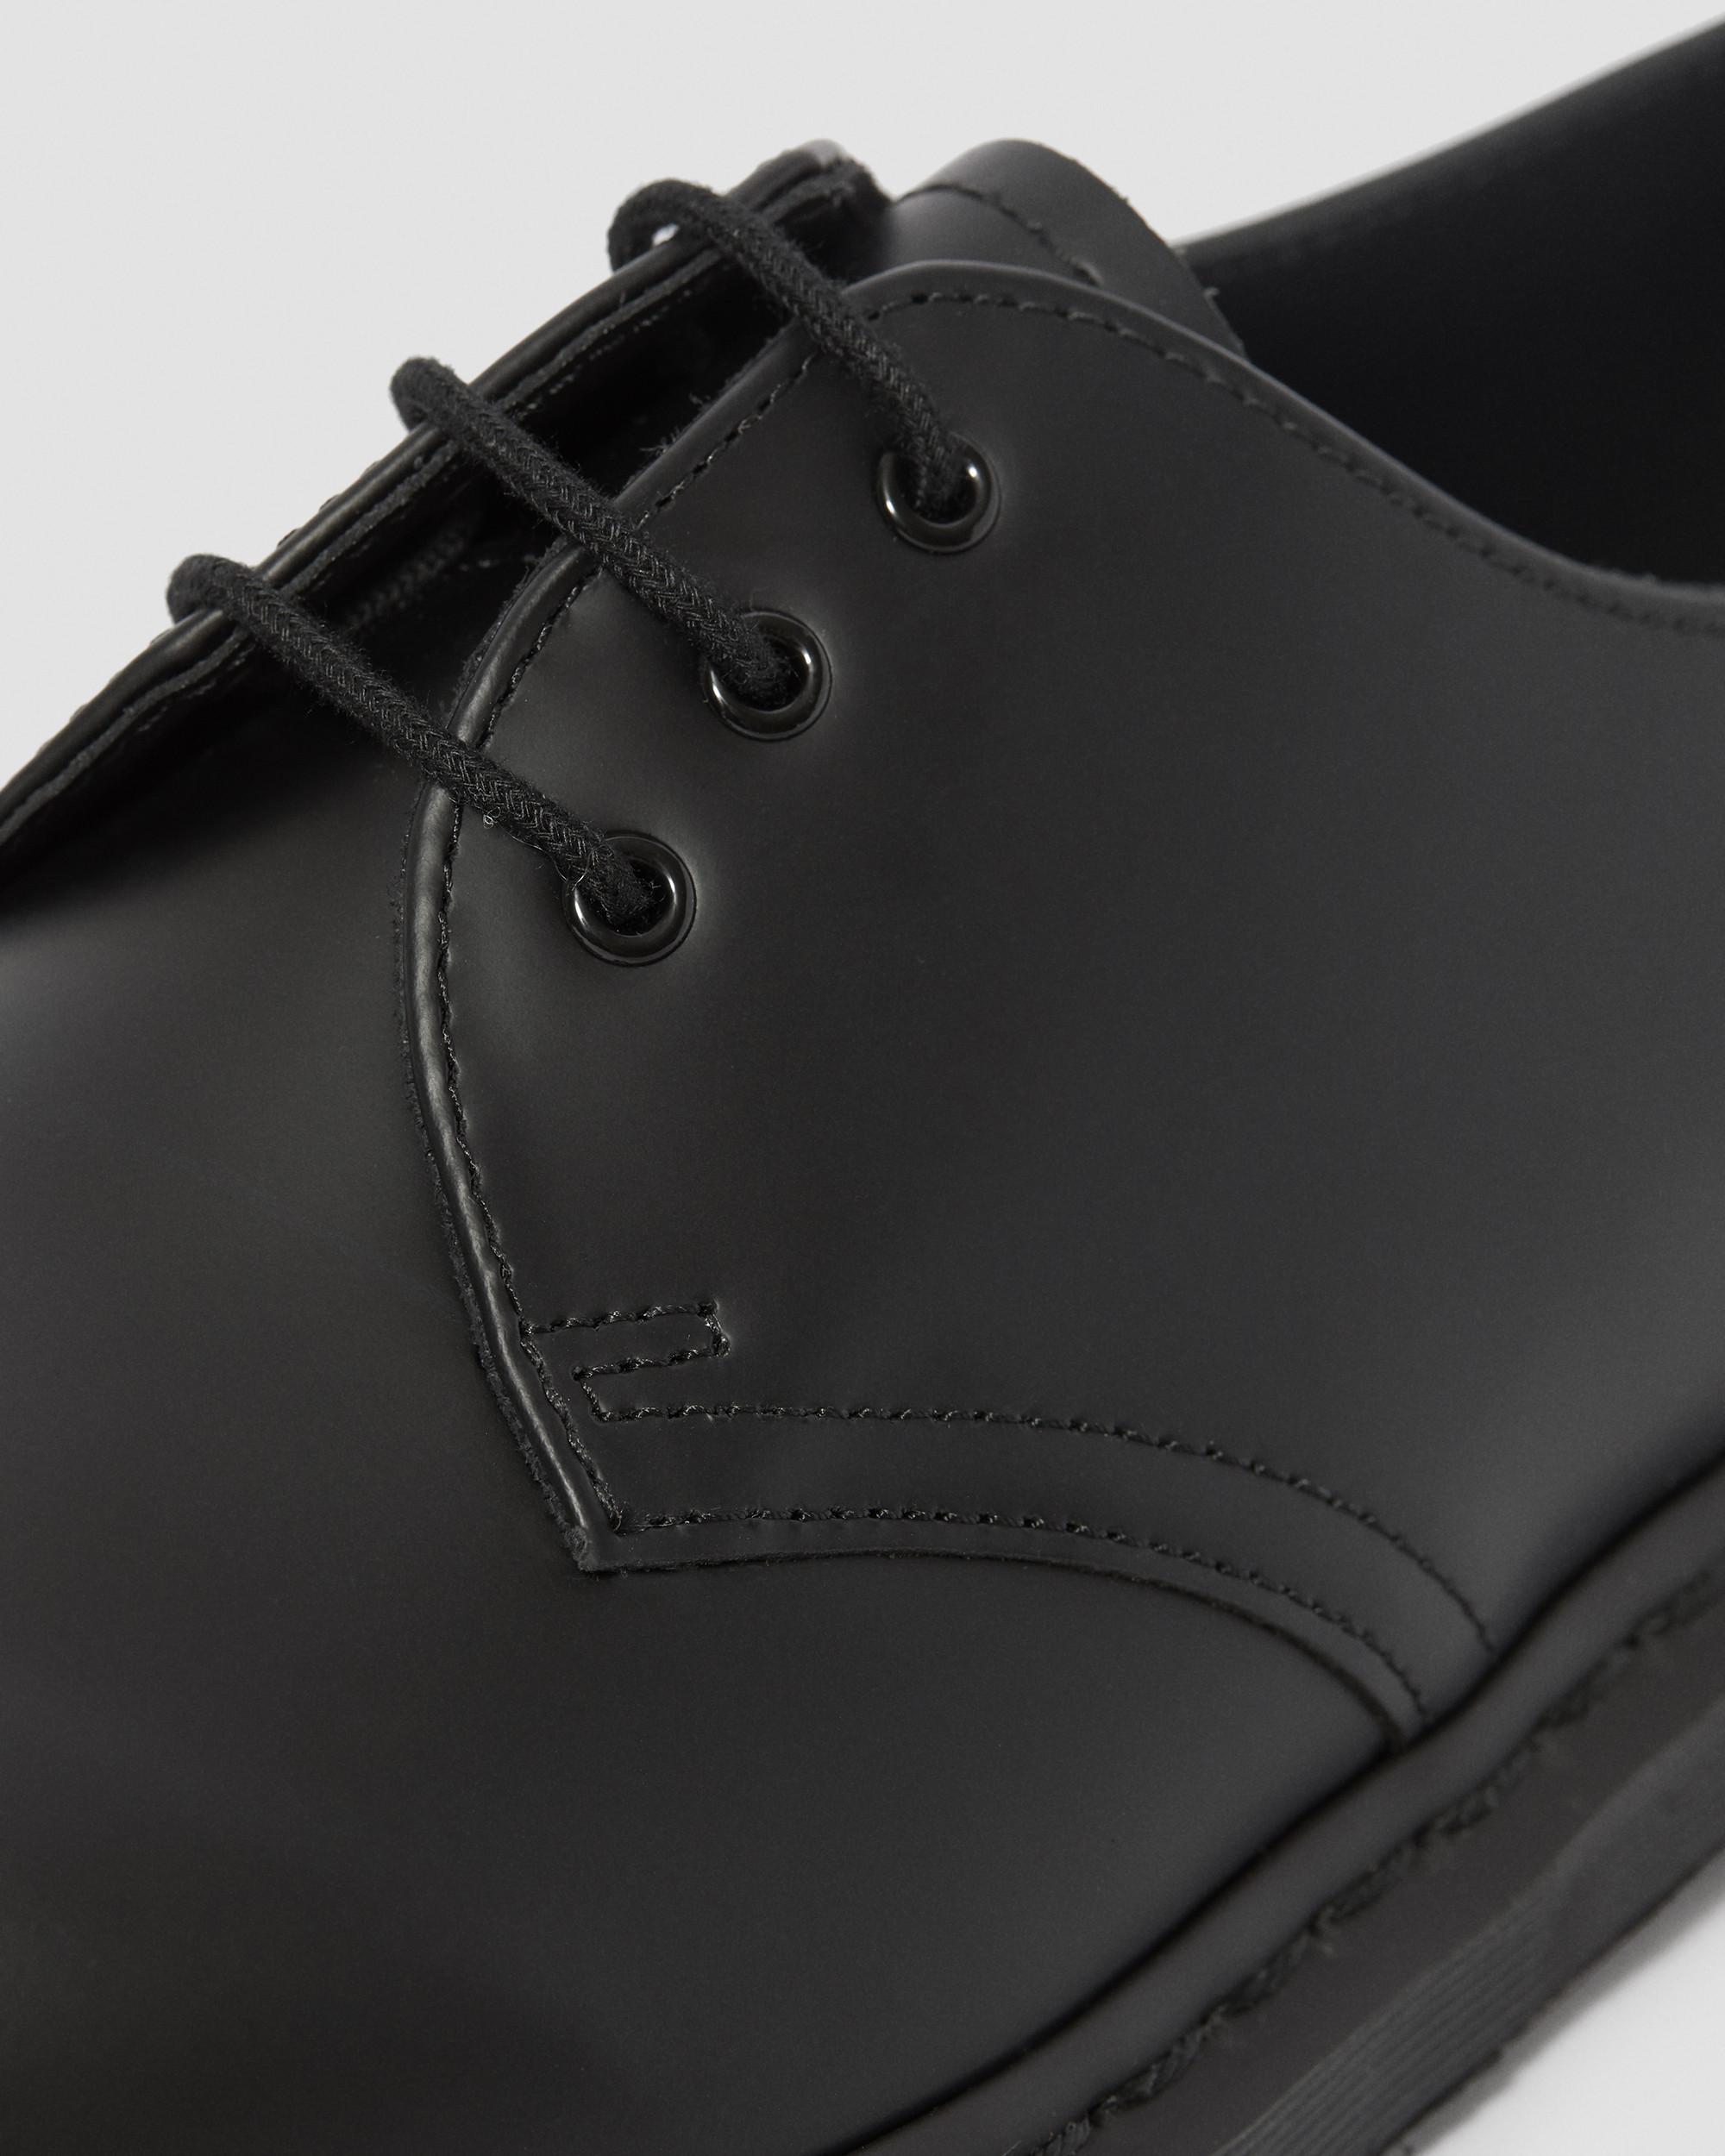 Mono Smooth Leather Oxford Shoes | Dr. Martens